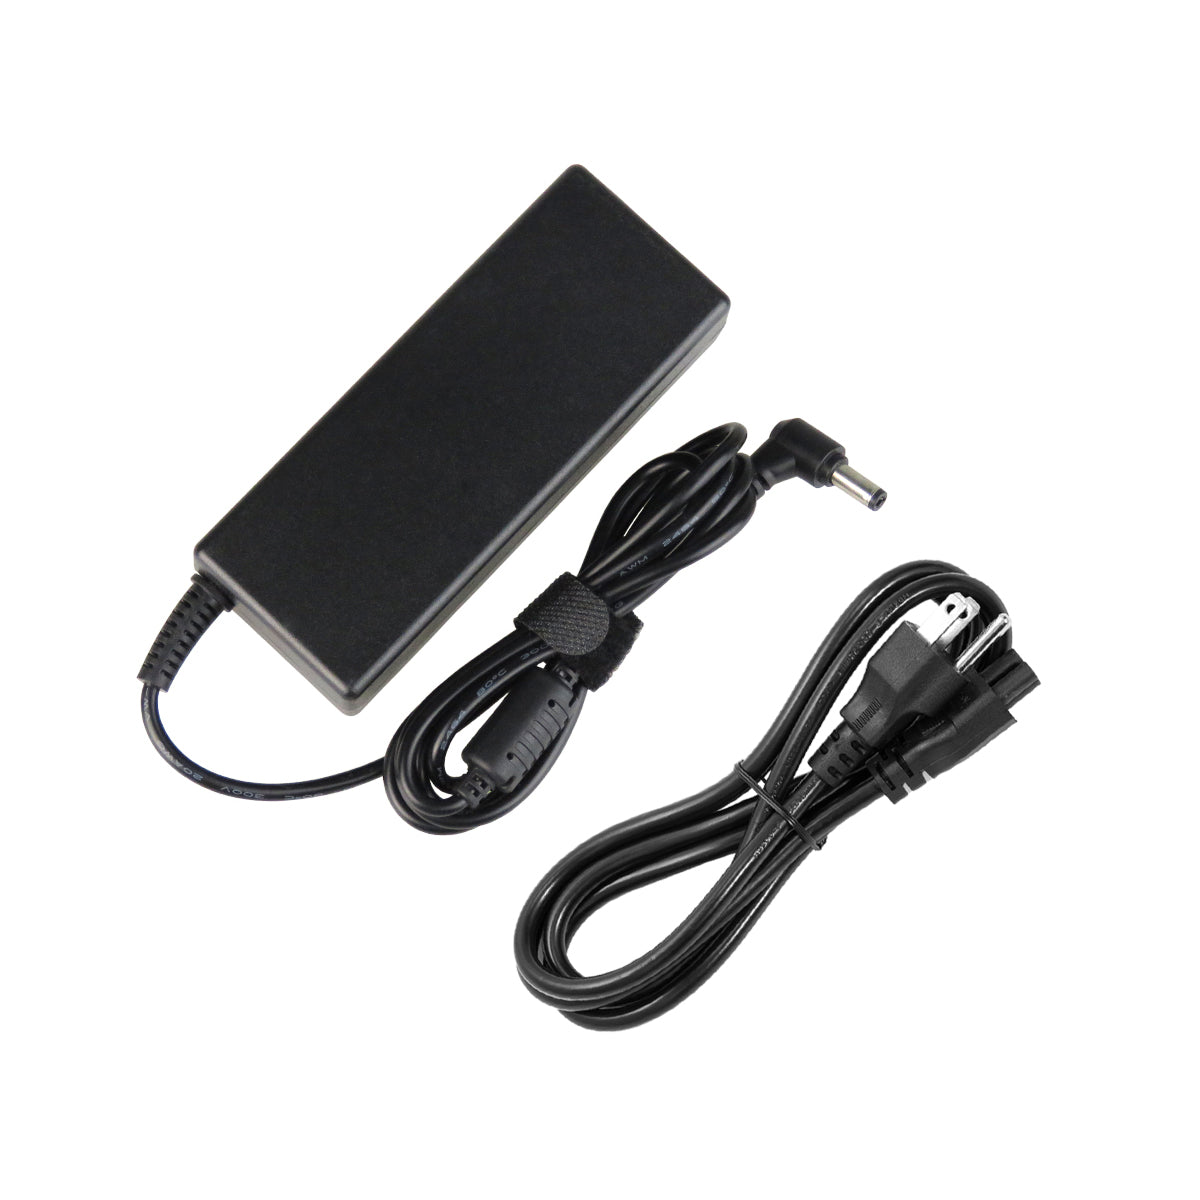 AC Adapter Charger for ASUS u56e Series Notebook.